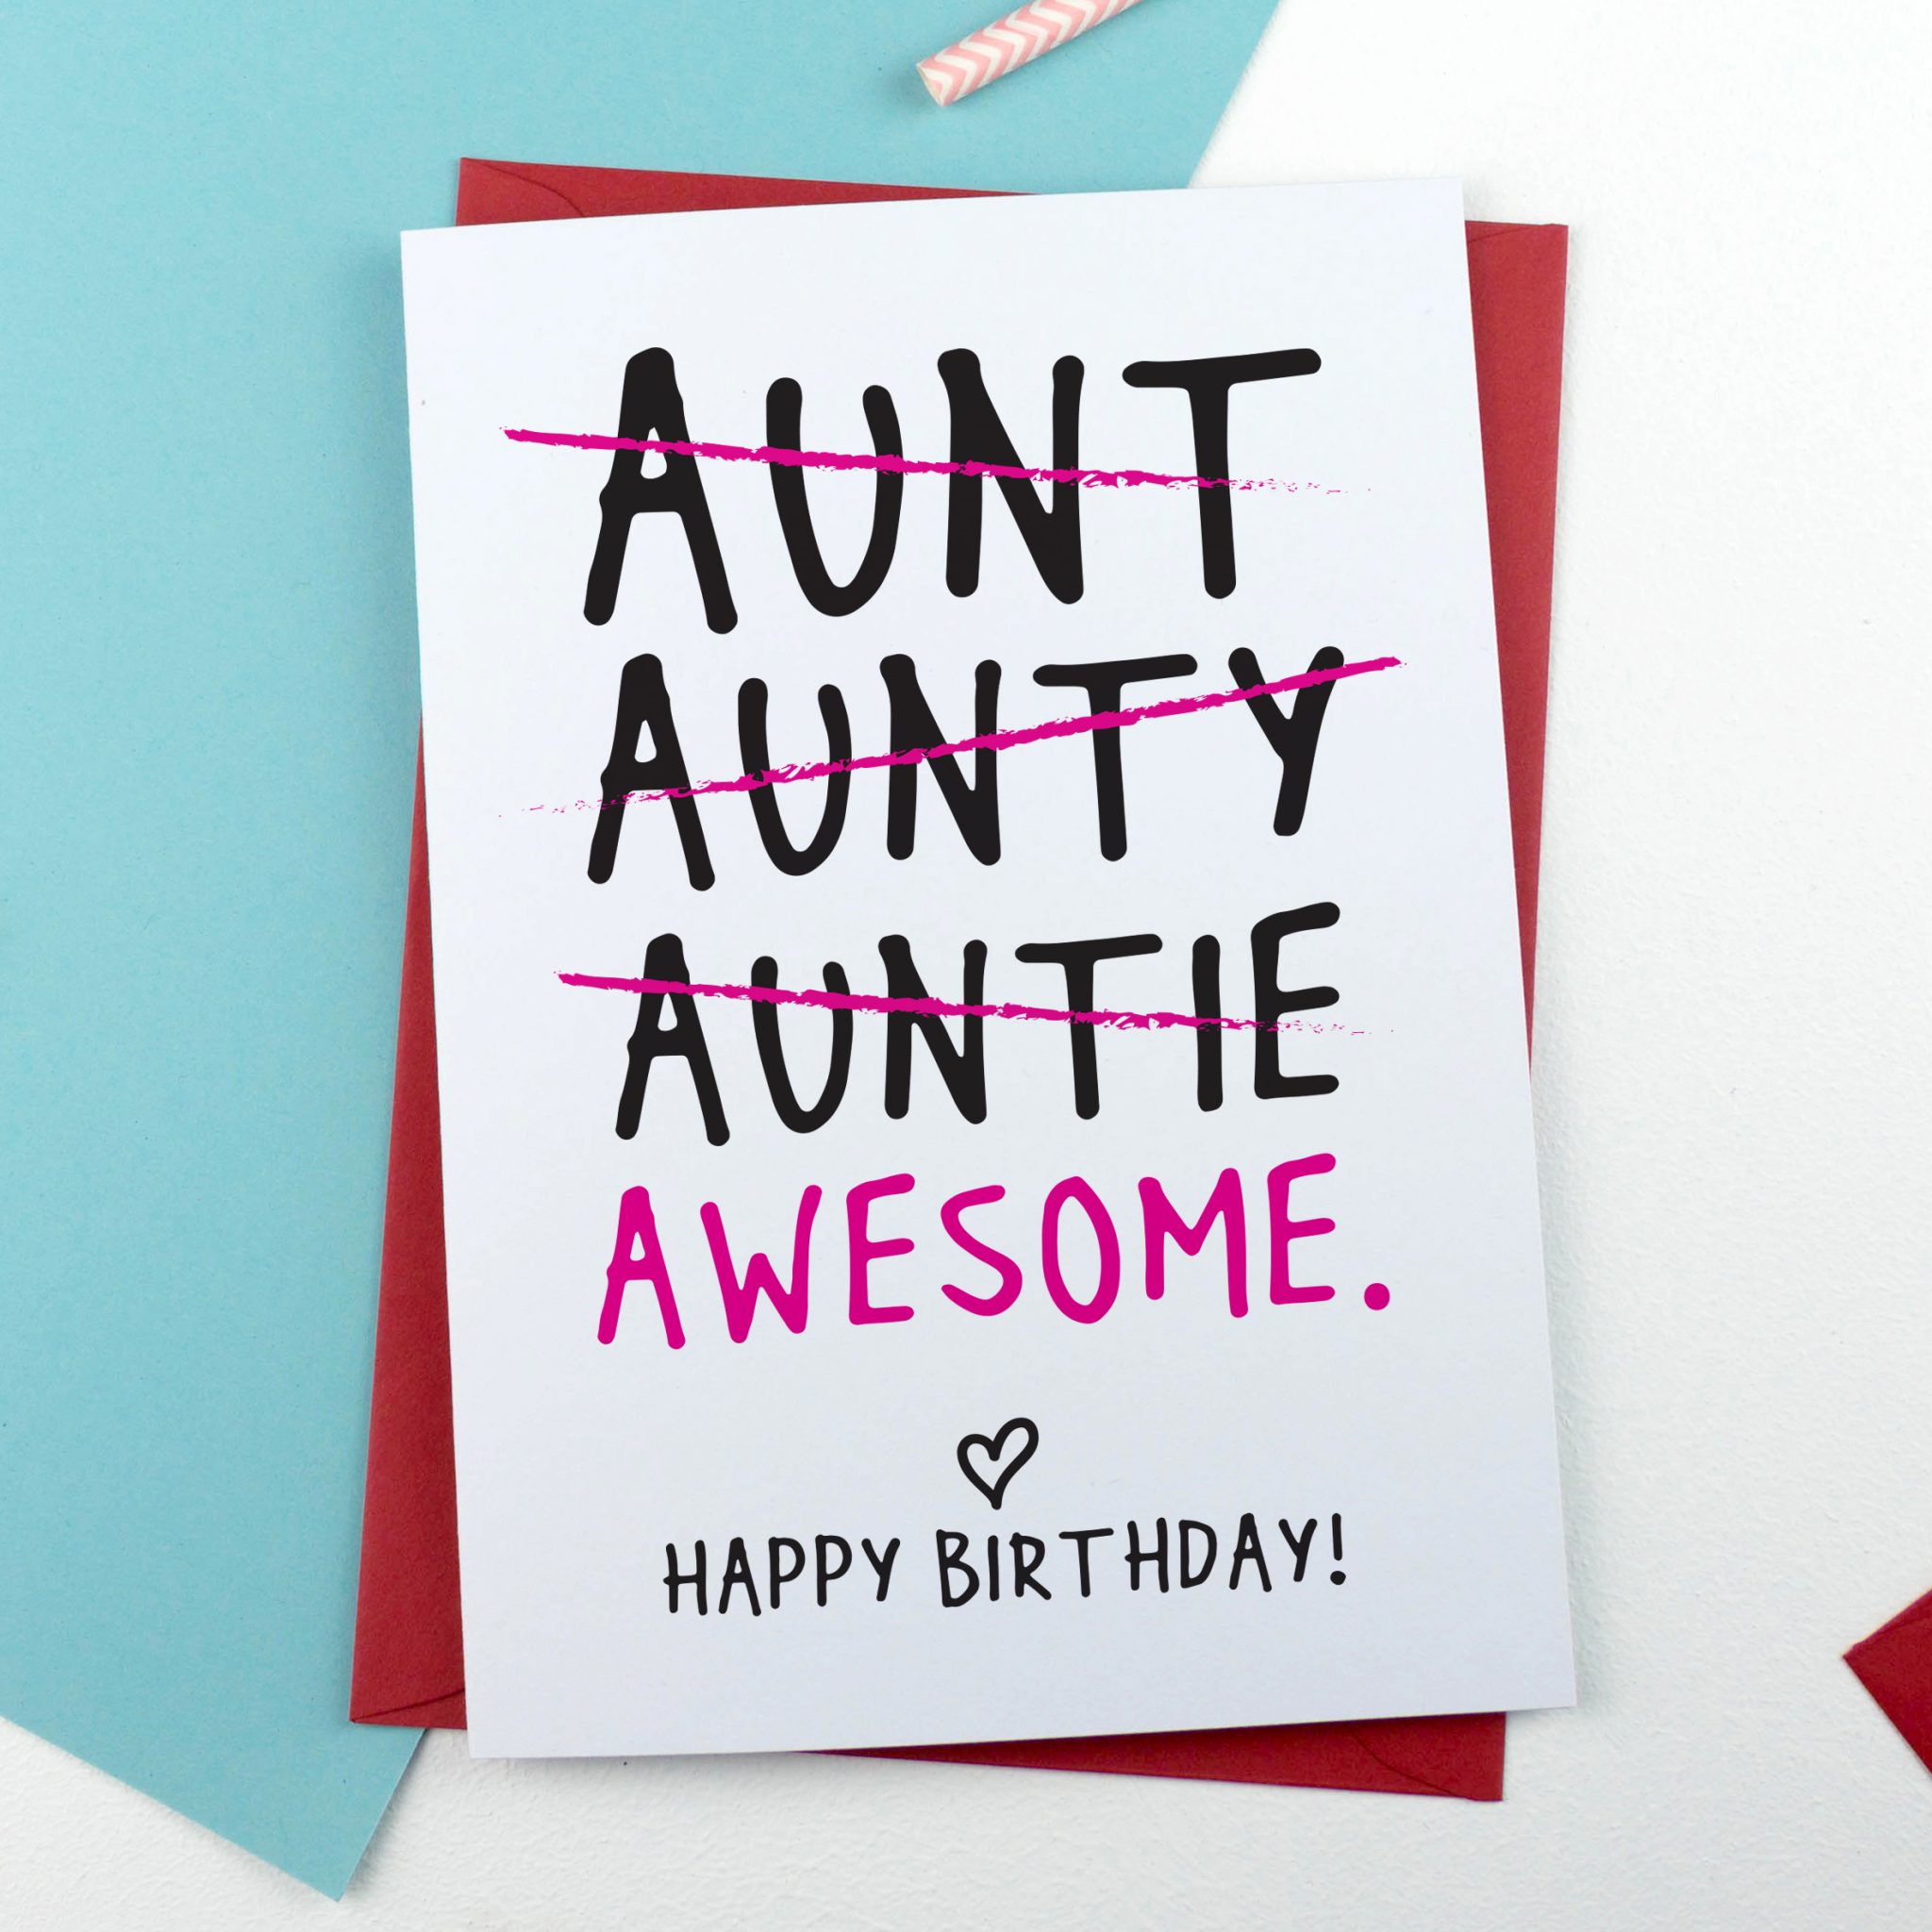 Funny Birthday Cards For Aunts Birthday Cake Images 